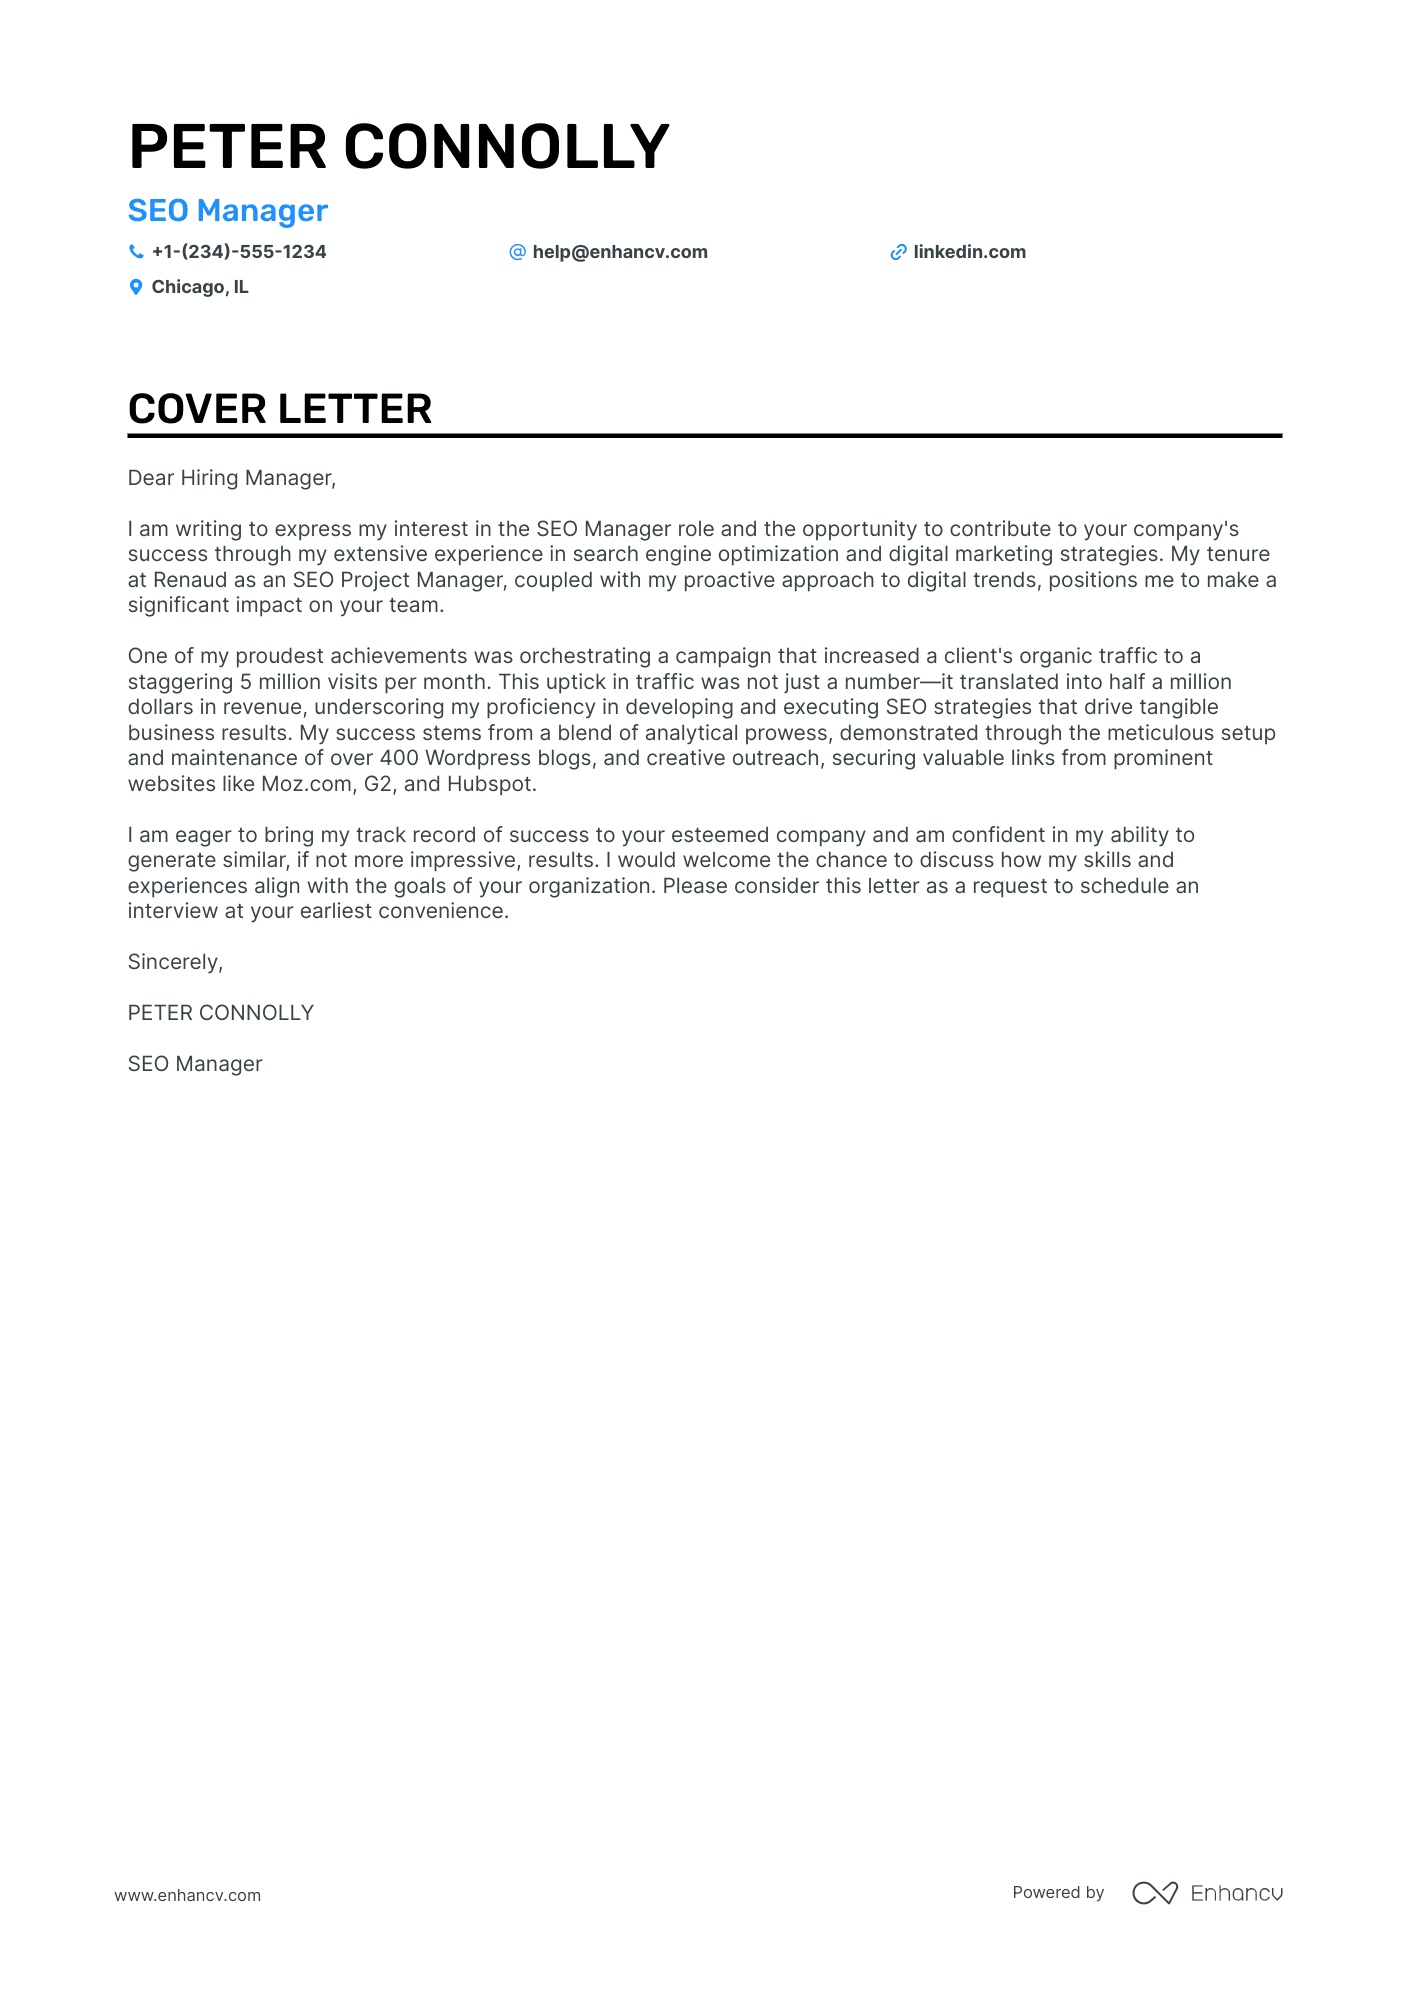 SEO Manager cover letter